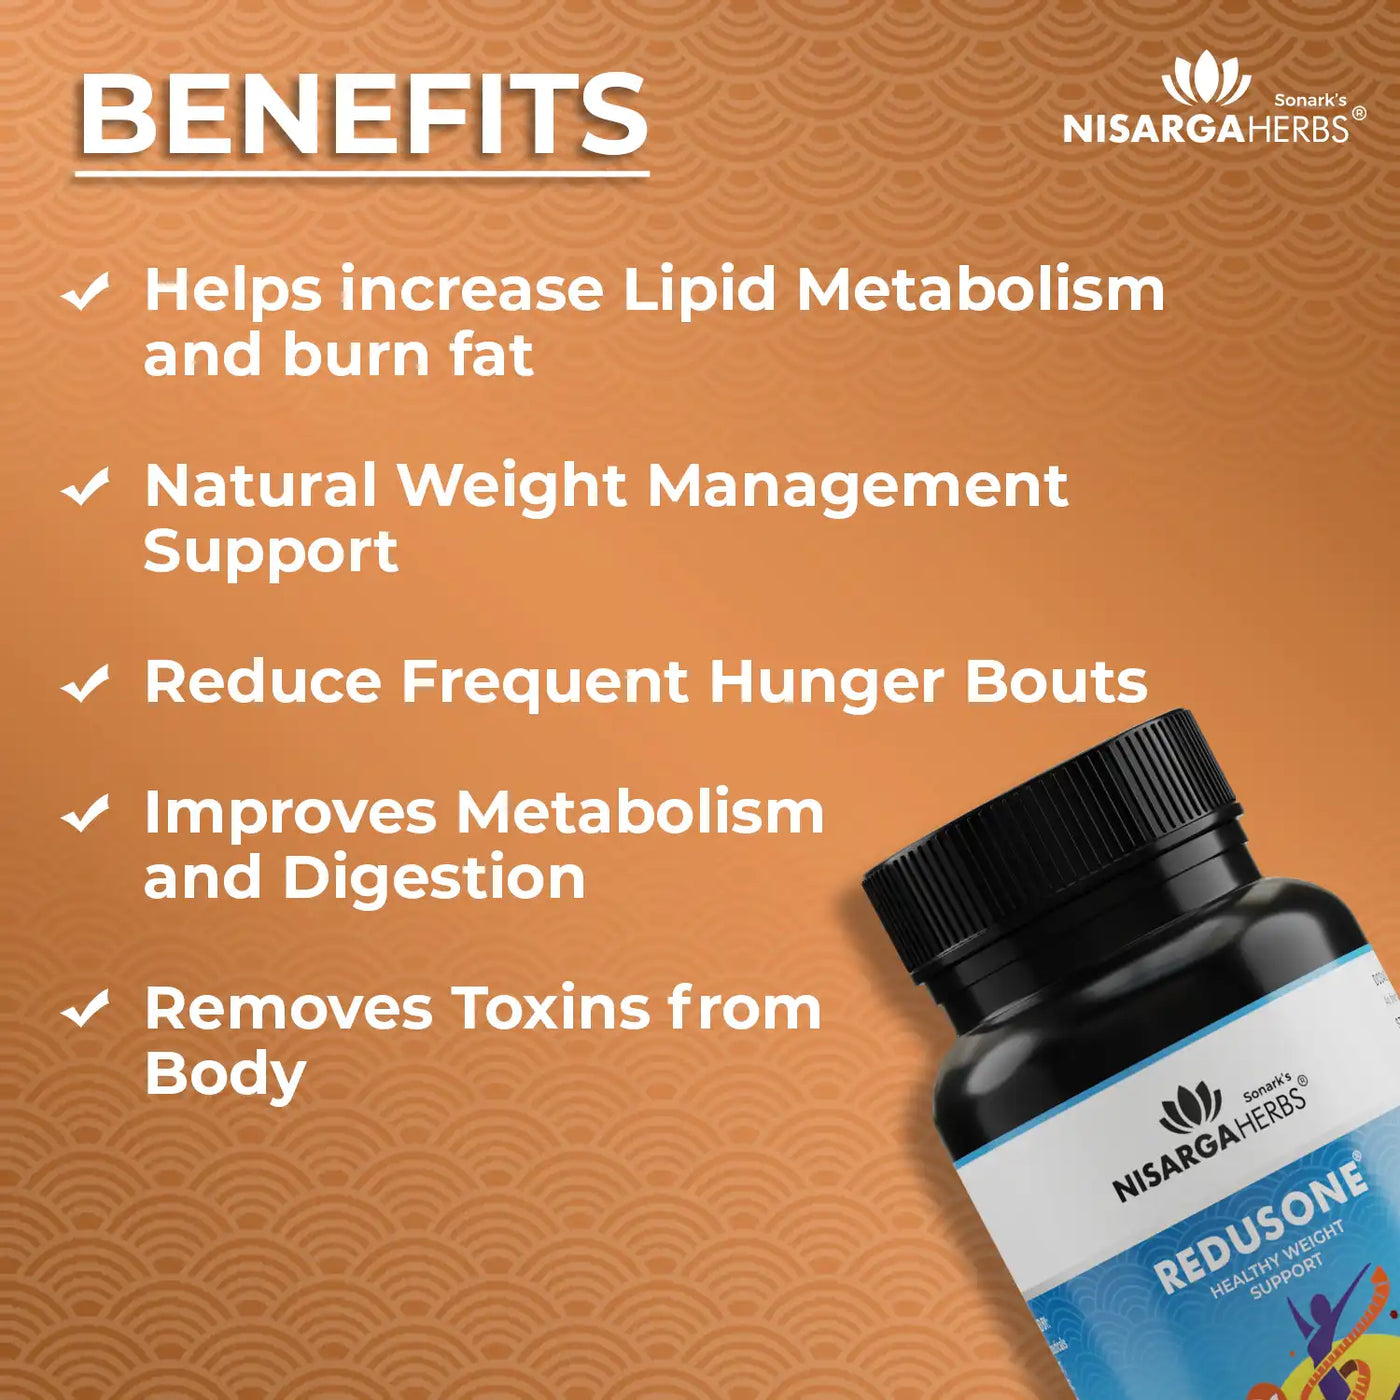 redusone increases lipid metabolism in body, improves digestion and helps in healthy weight management. 